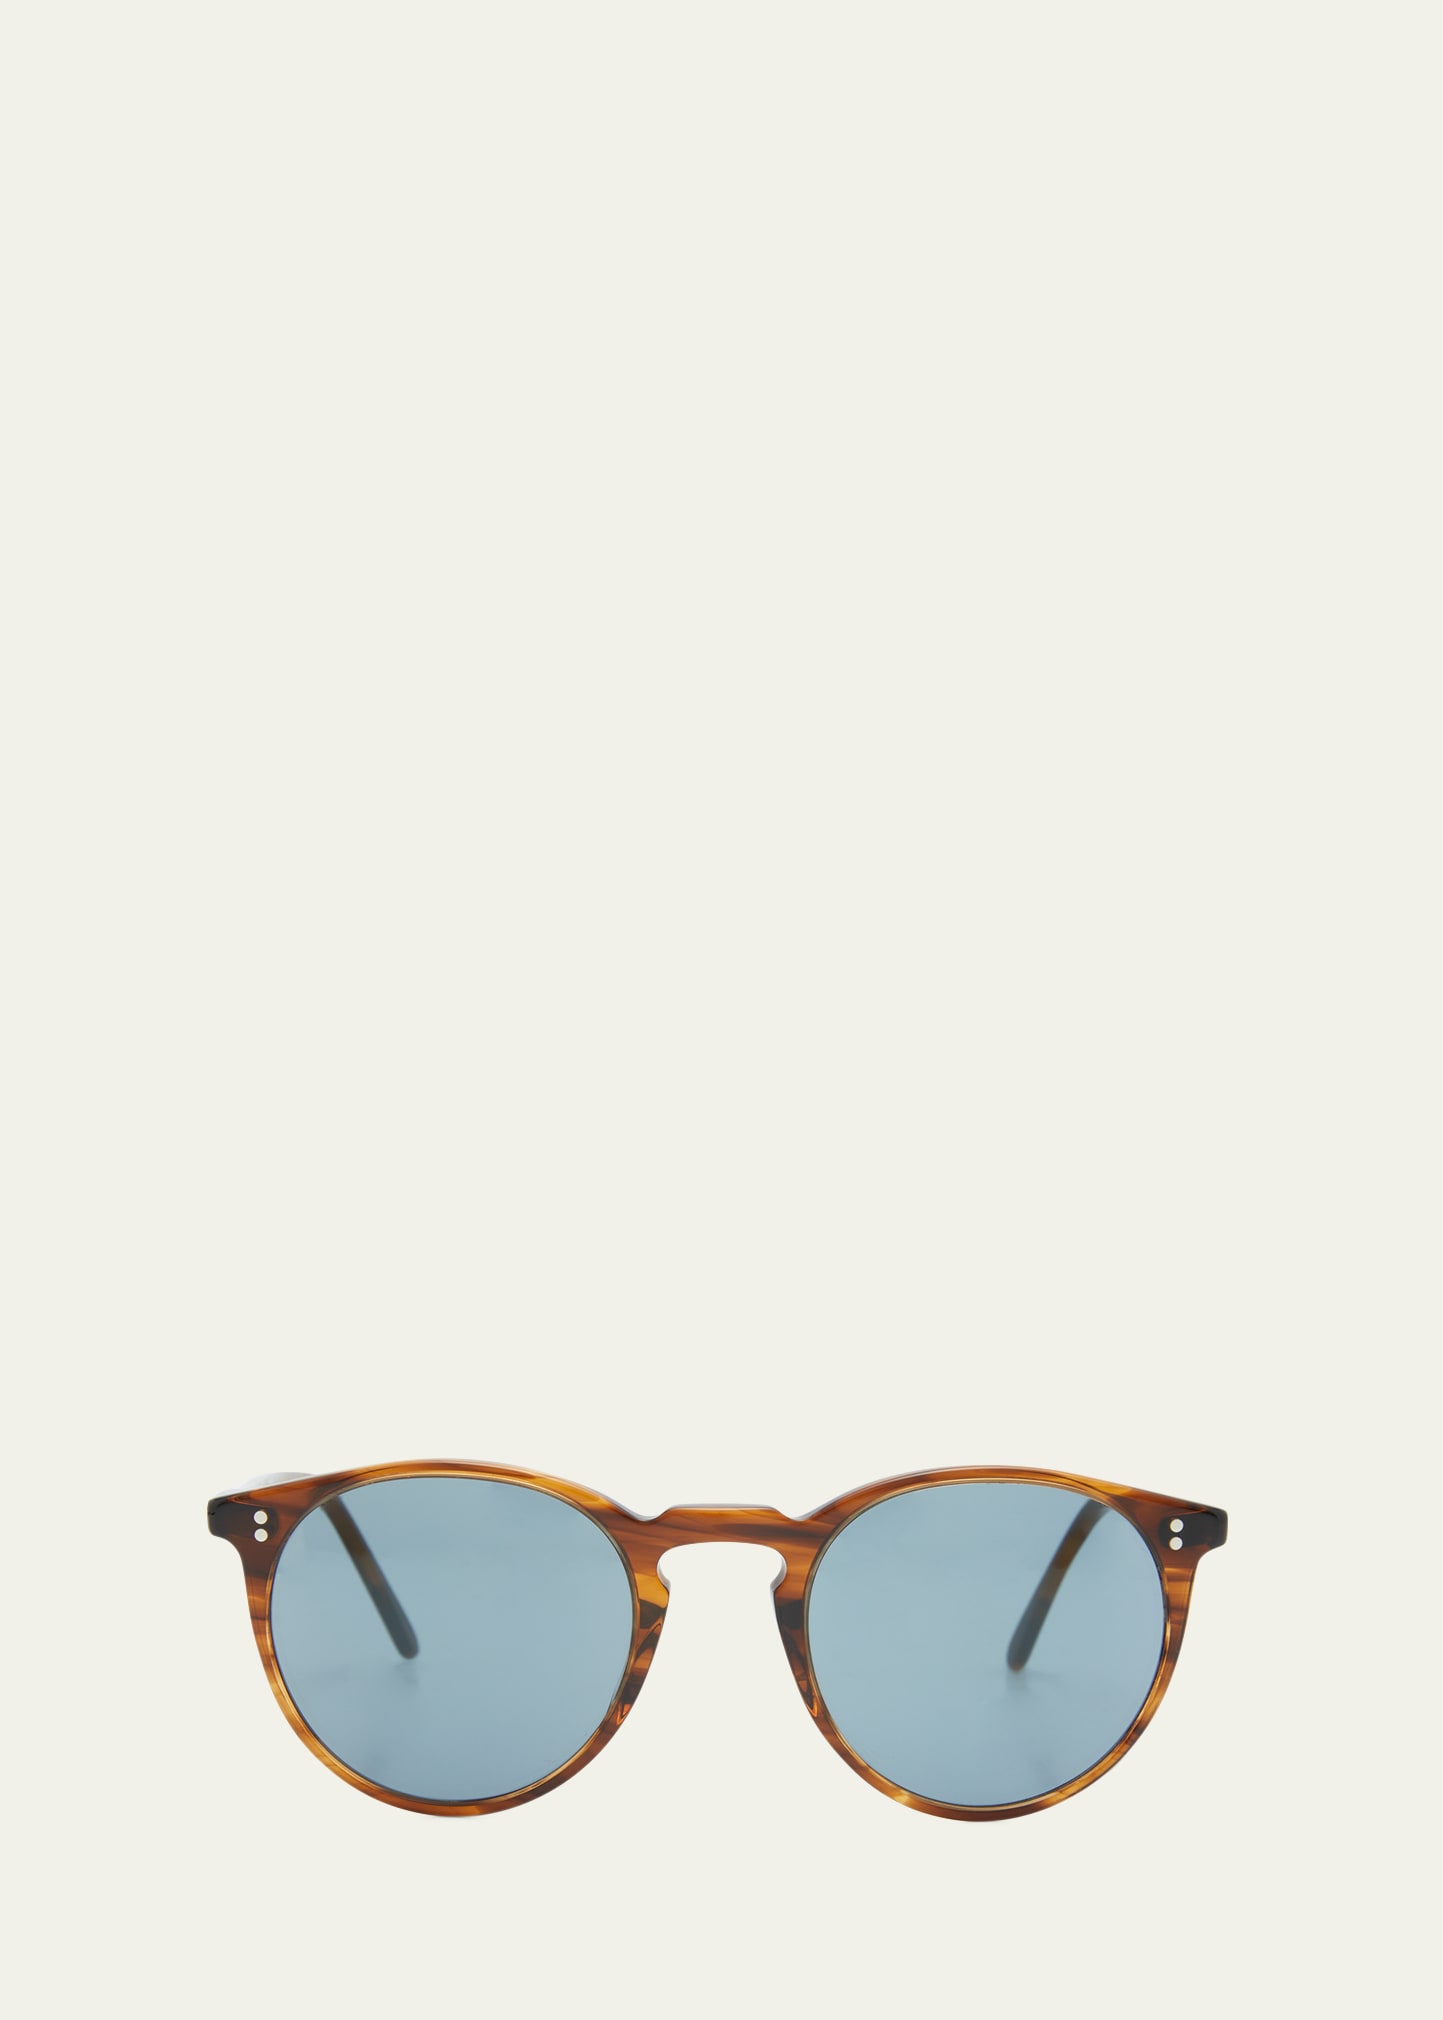 OLIVER PEOPLES MEN'S O'MALLEY NYC PEAKED ROUND SUNGLASSES